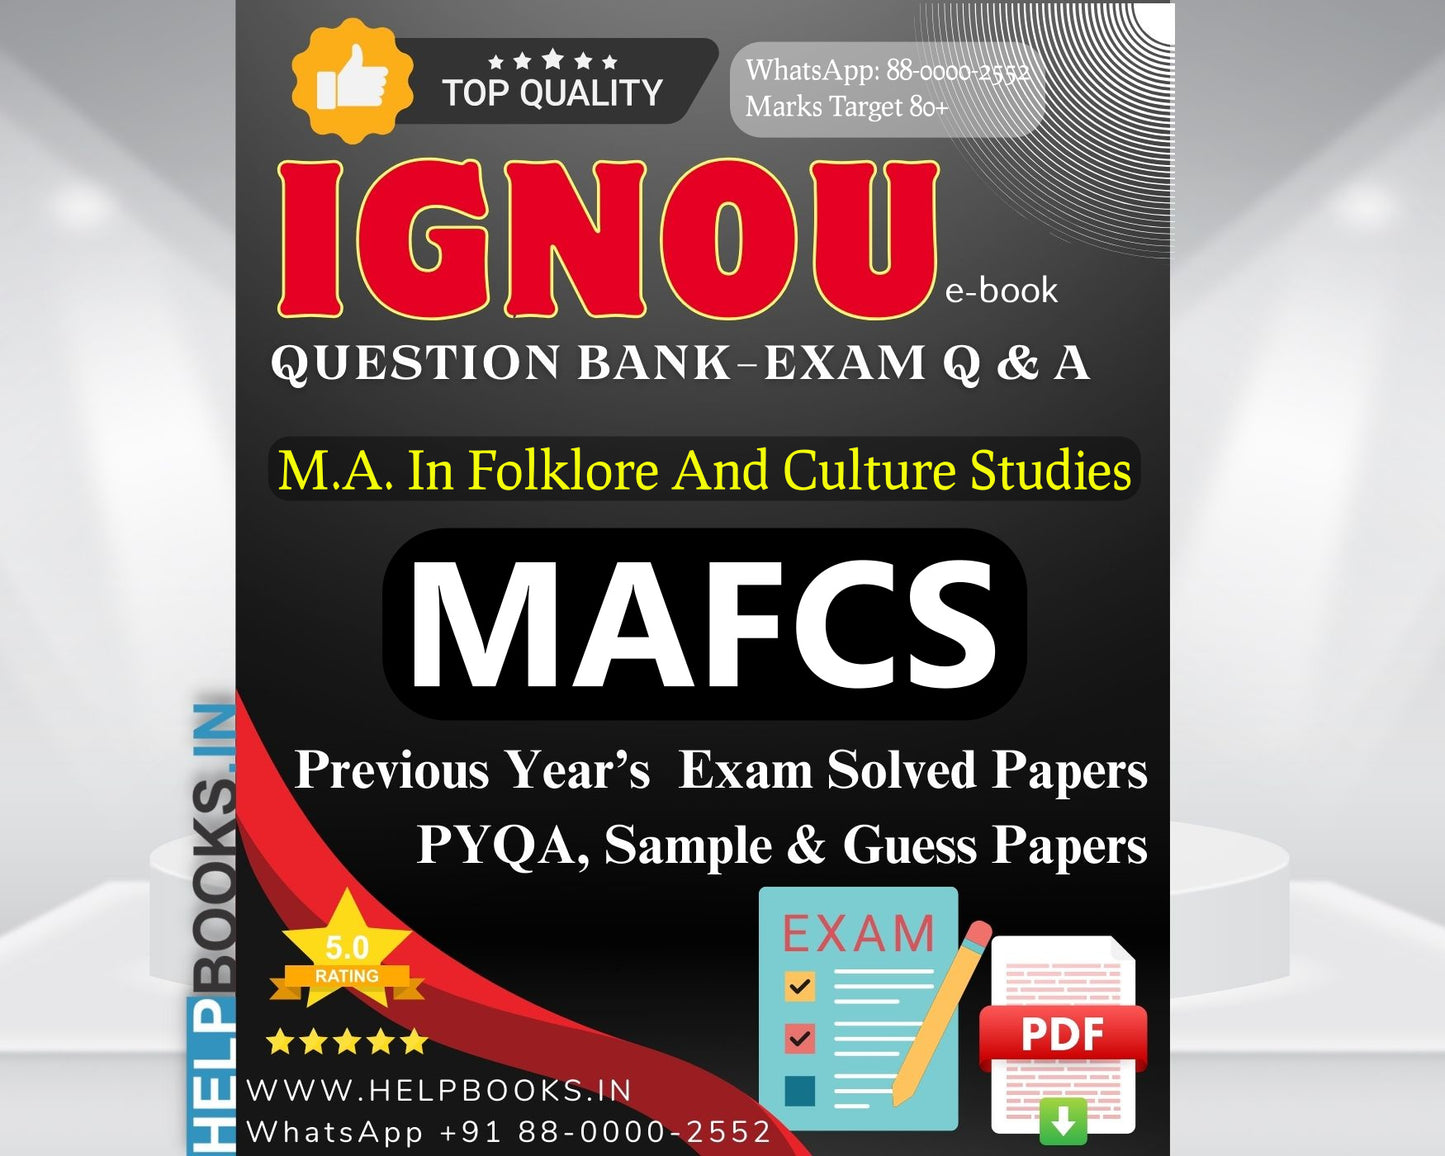 MAFCS IGNOU Exam Combo of 10 Solved Papers: 5 Previous Years' Solved Papers & 5 Sample Guess Papers for Master of Arts Folklore and Culture Studies